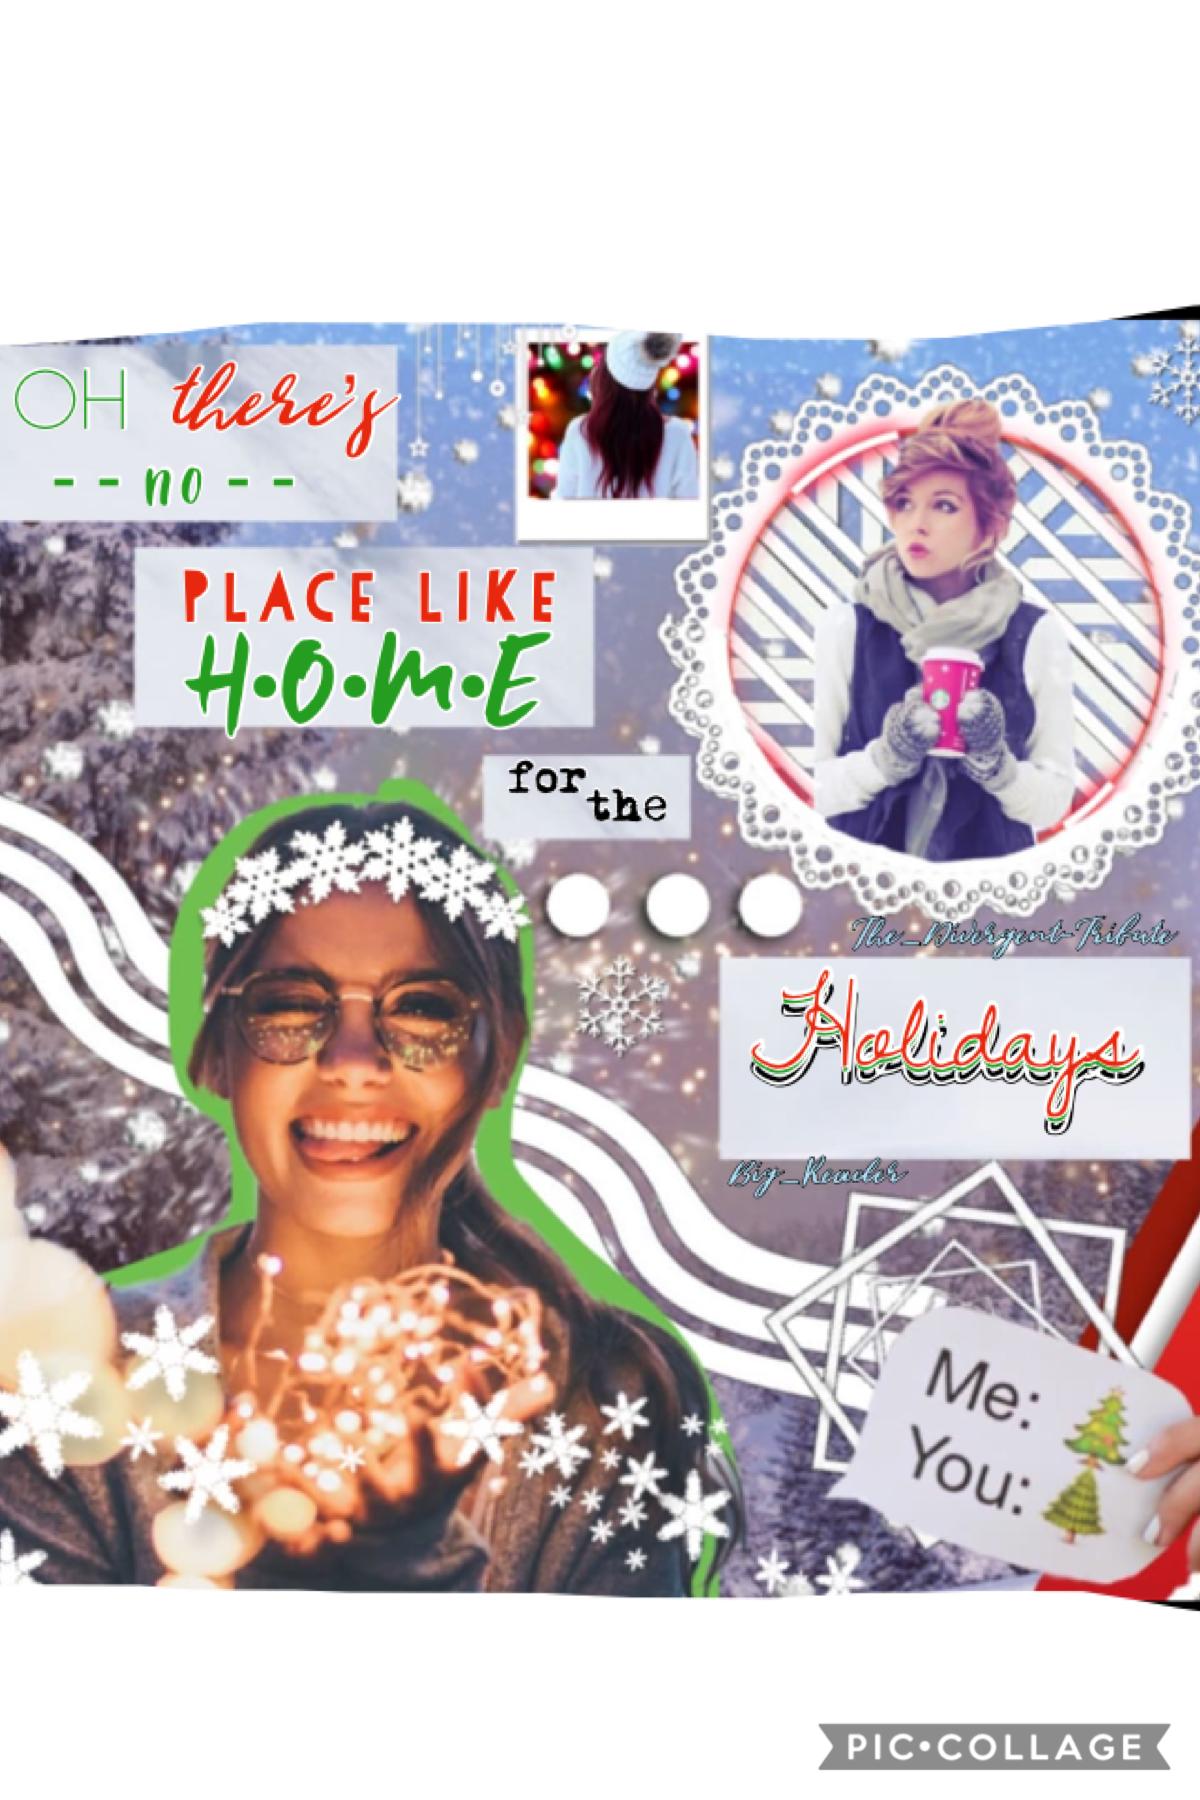 Christmas collab with The_Divergent-Tribute ! 🎄❄️
This was a SUPER fun collab!! She did the amazing background and I did the text!! Go check out her awesome account and follow her immediately 😱😍 QOTD: sledding or sleigh rides? AOTD: sledding cause I have 